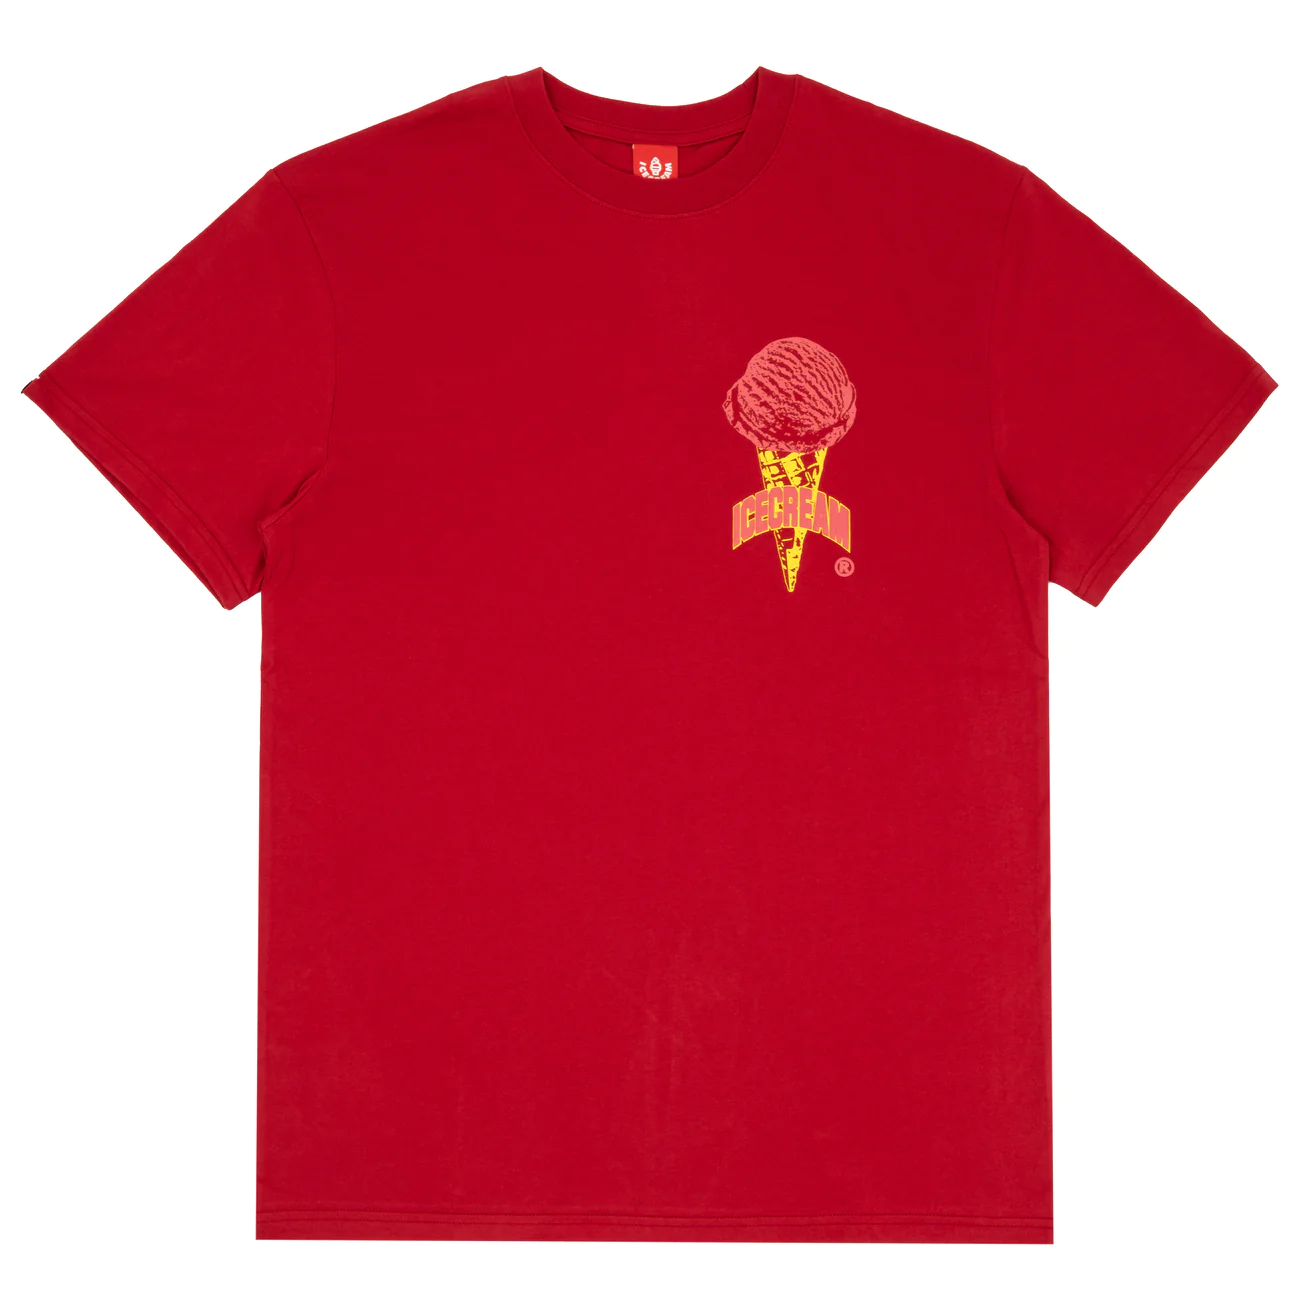 Icecream Out Of This World S/S Tee (Oversized) Chili Pepper